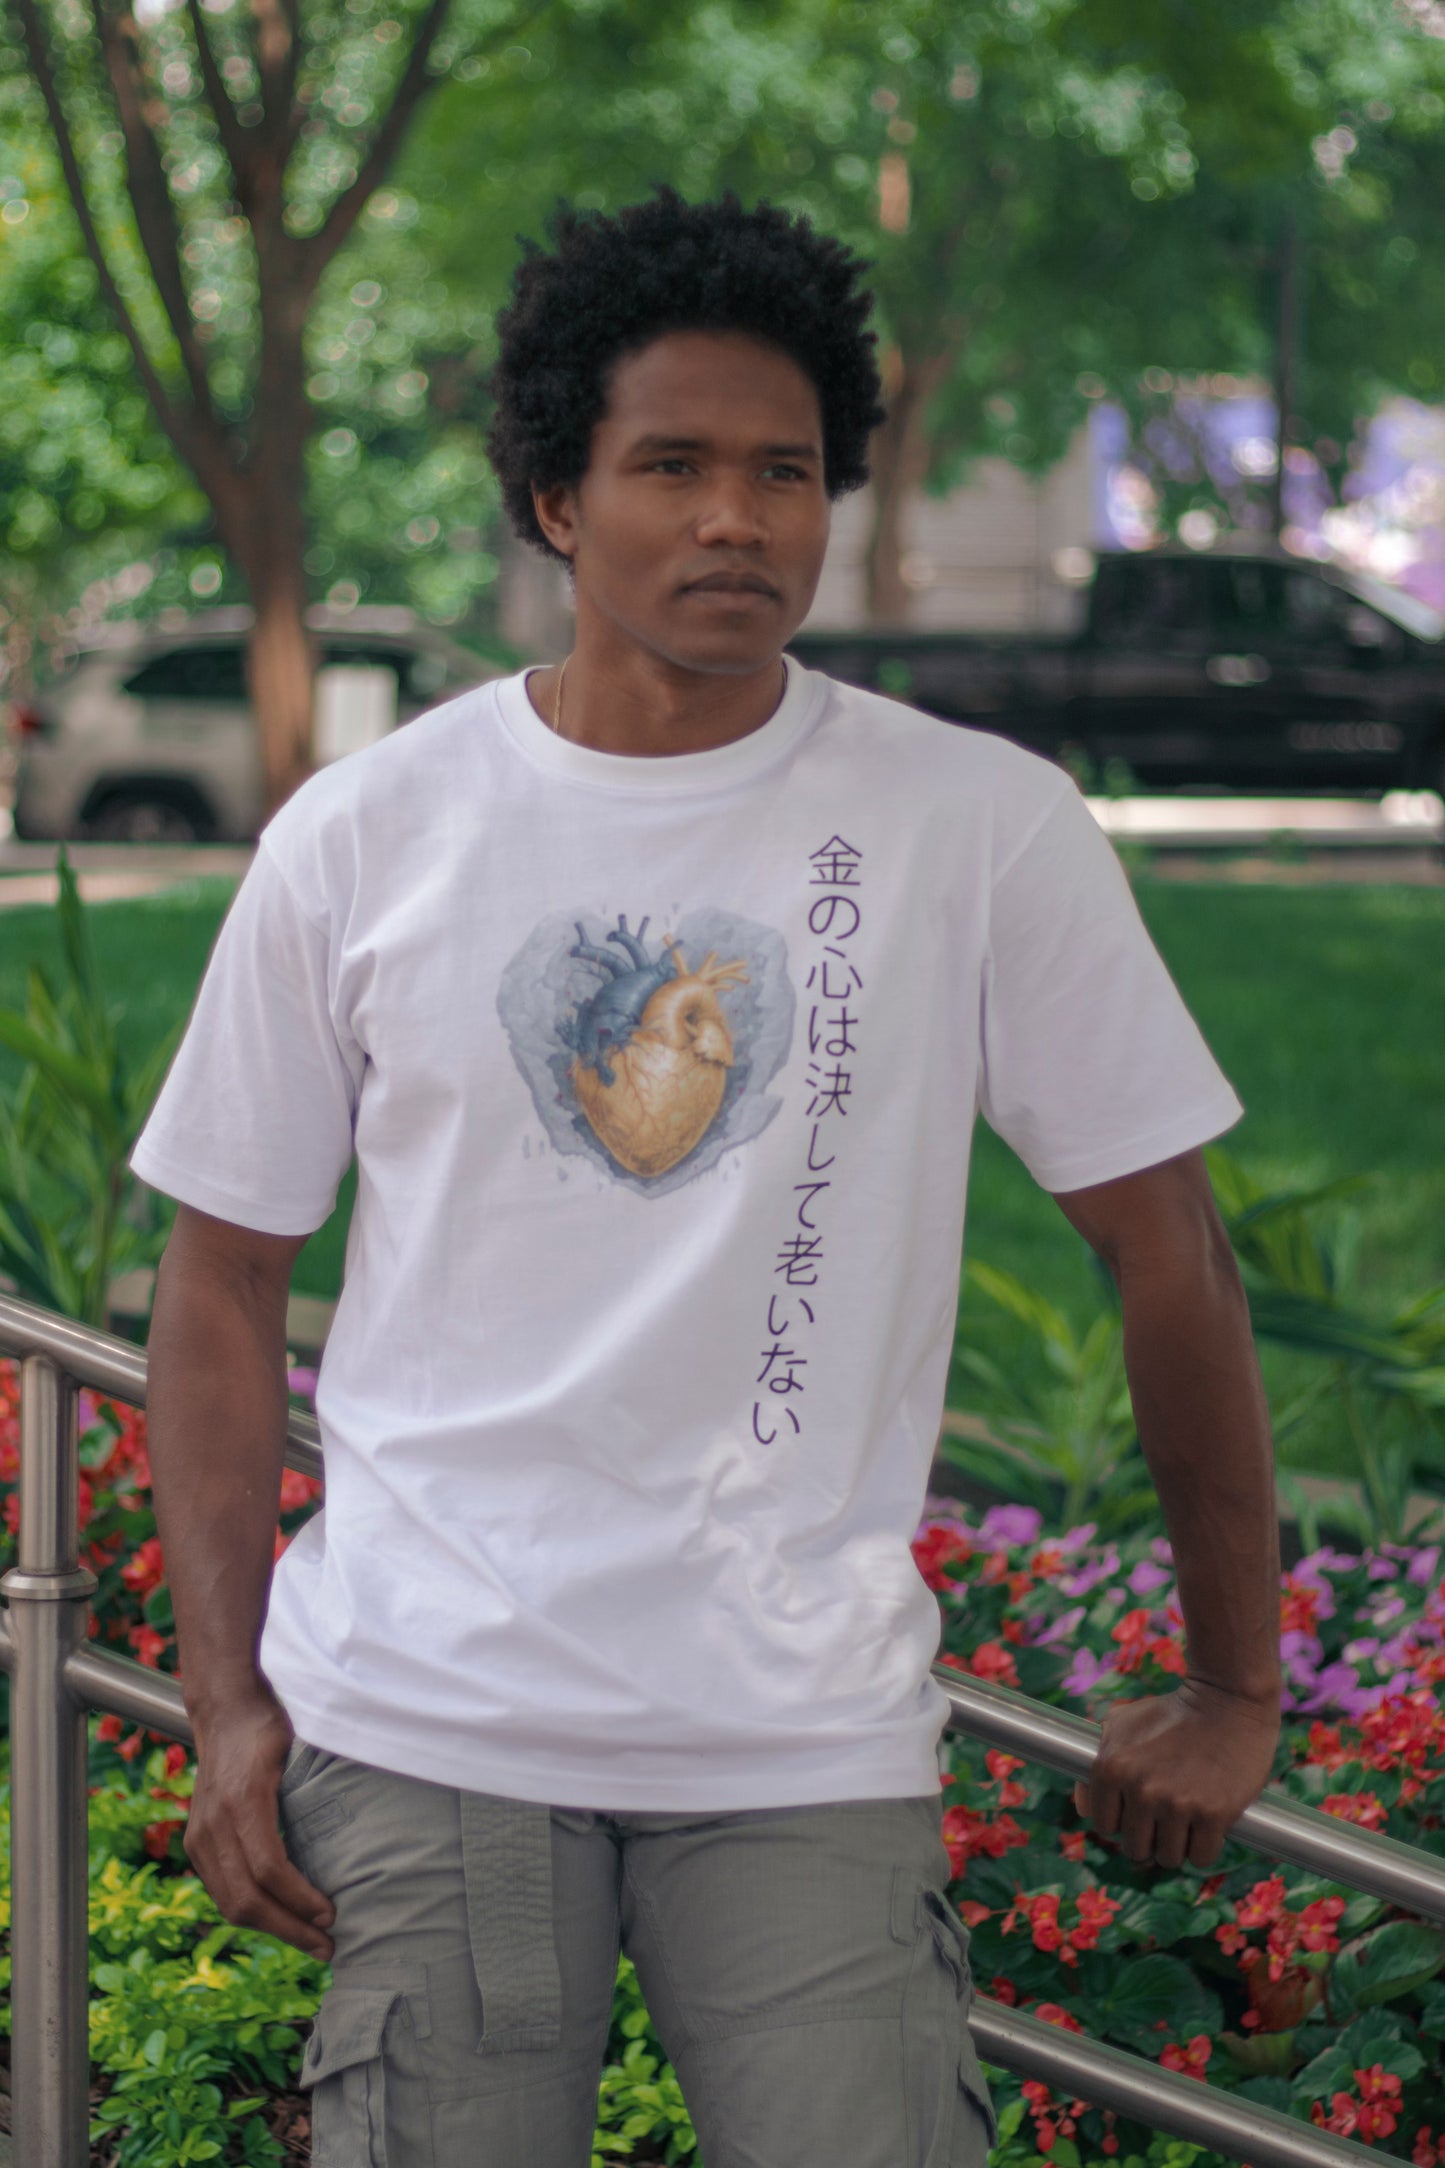 Voyager Gold heart cotton t-shirt modeled by Vidal Dias outside the federal reserve in Atlanta GA